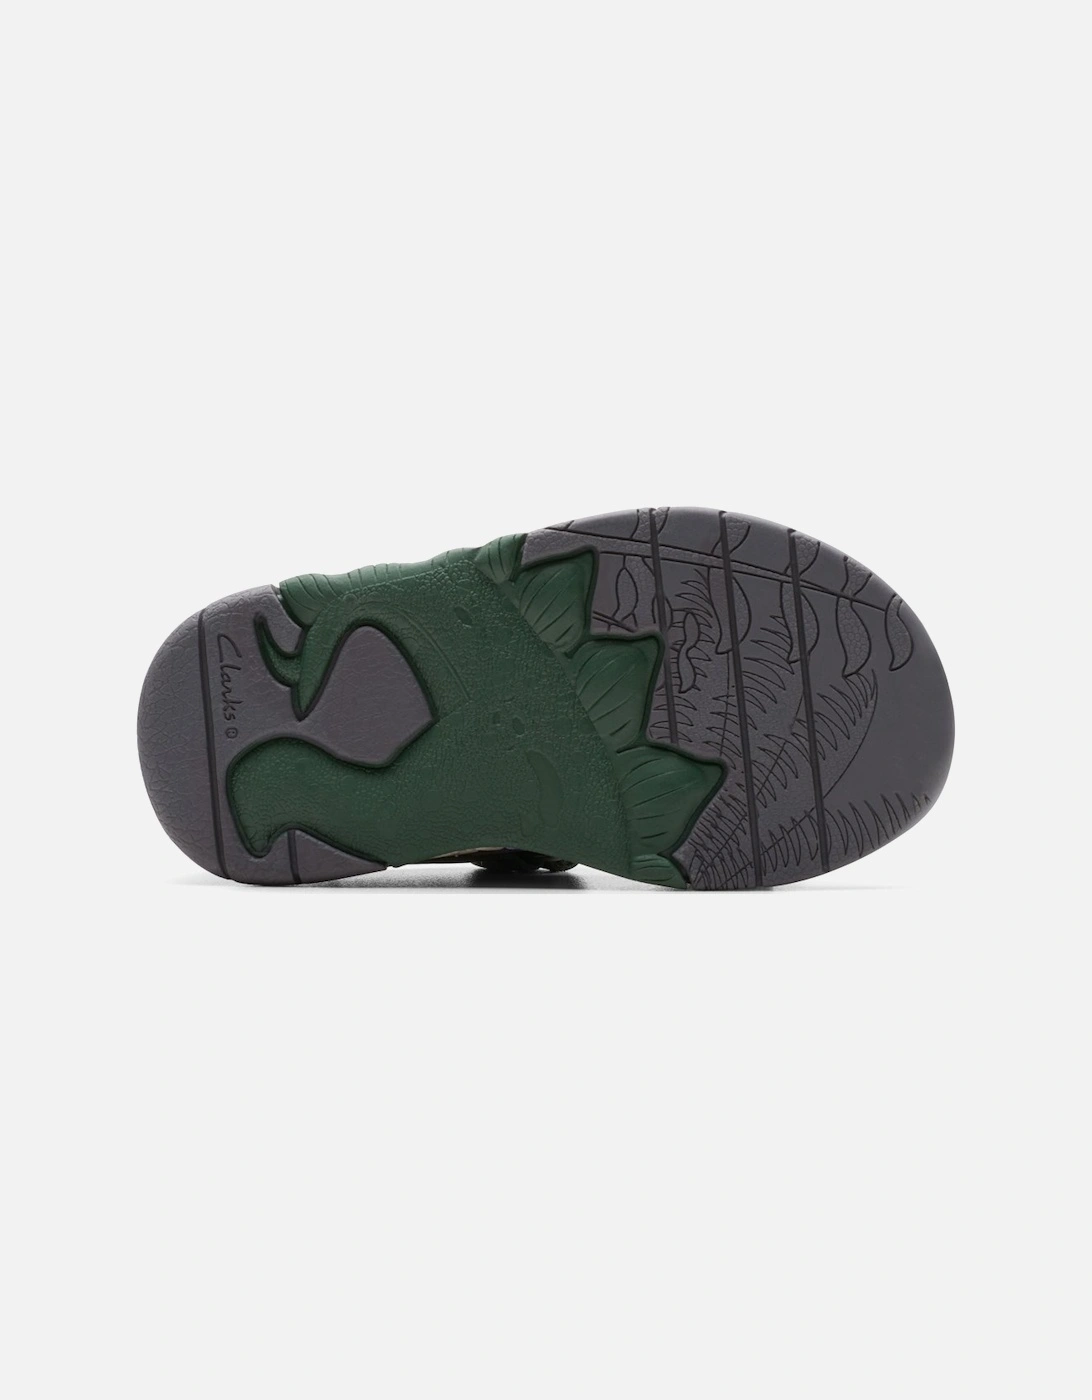 Spiney Stomp T Boys First Sandals